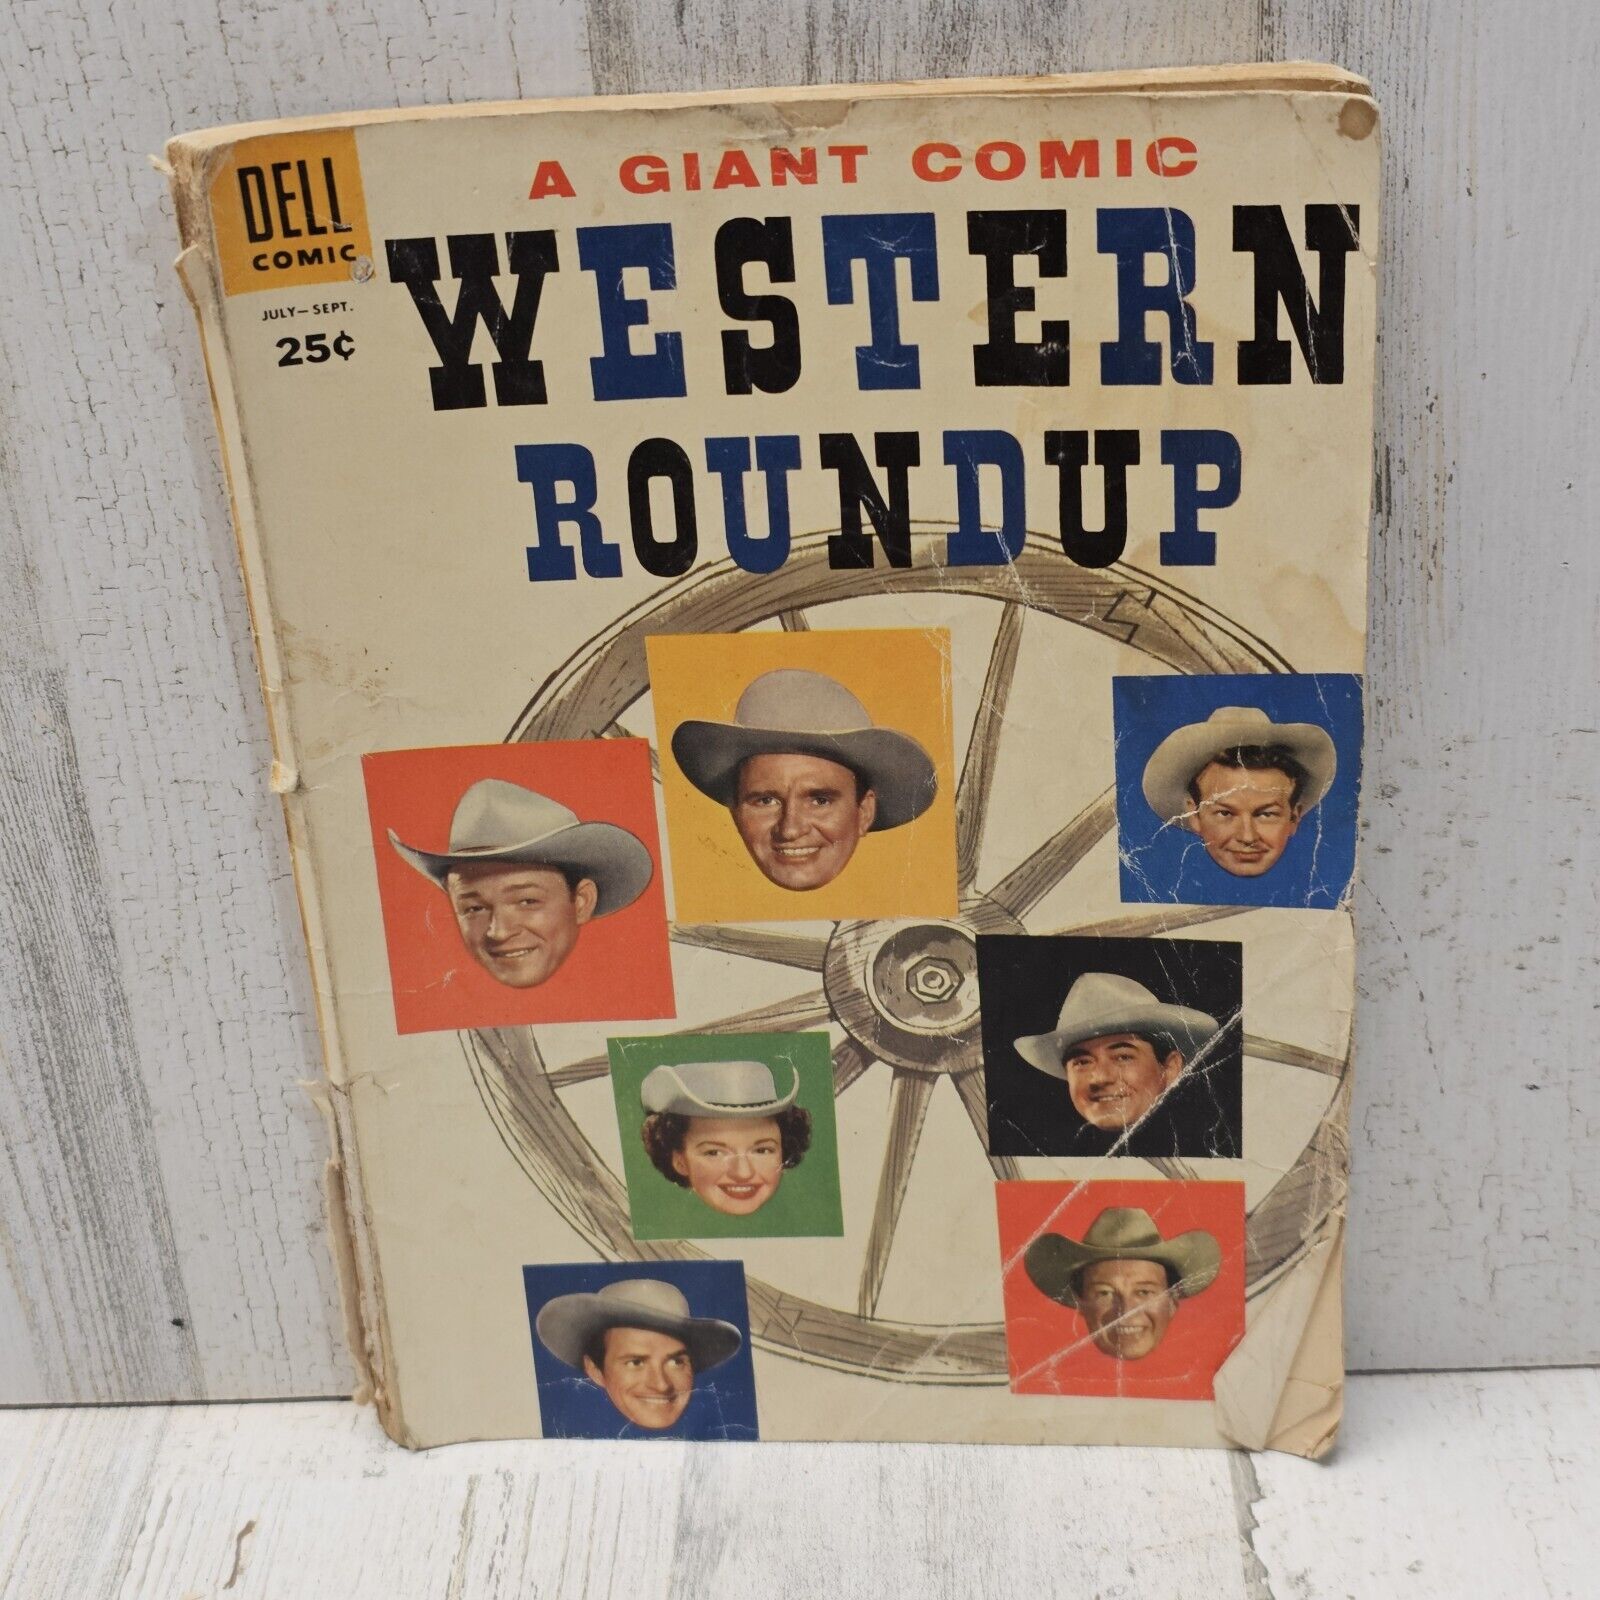 WESTERN ROUNDUP - A Giant DELL Comic Book, July-Sept 1955 - Roy Rogers